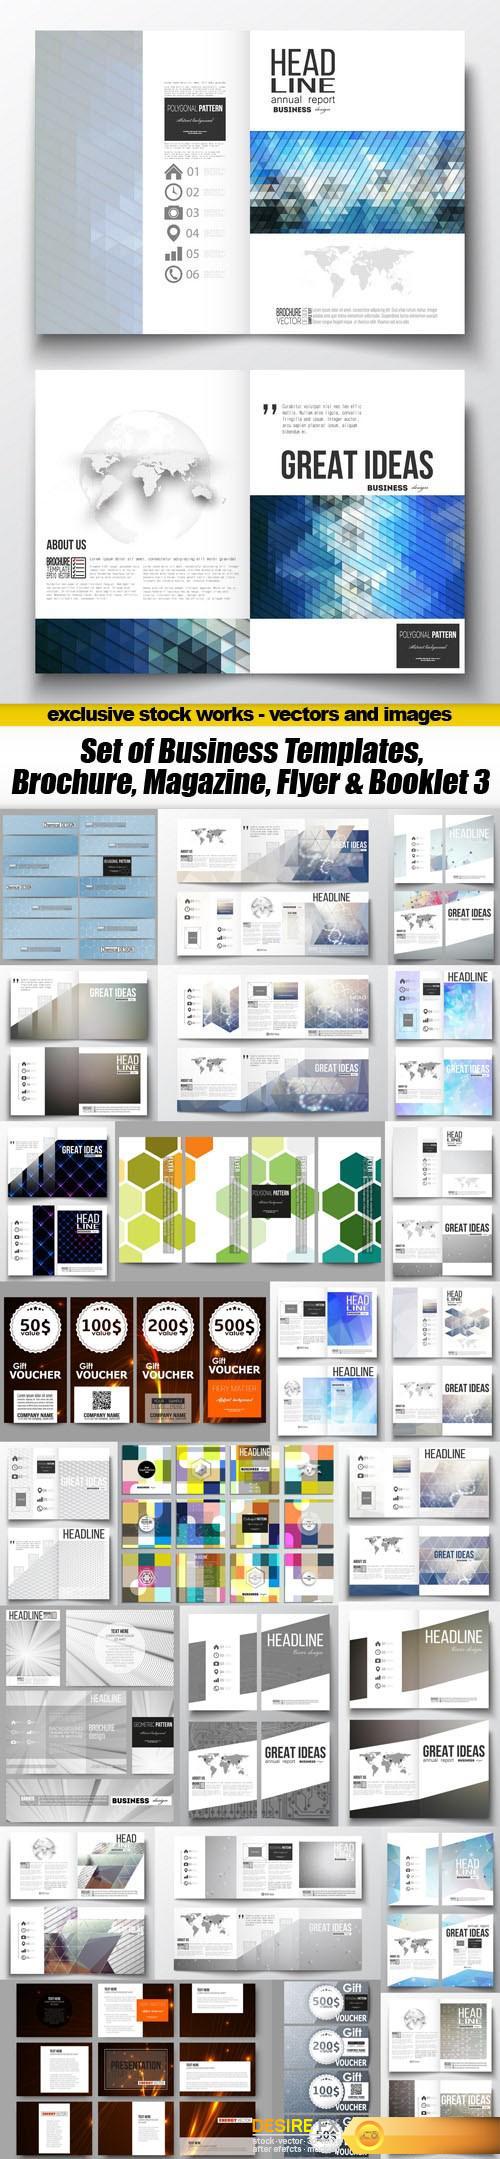 Set of Business Templates, Brochure, Magazine, Flyer & Booklet 3 - 25xEPS